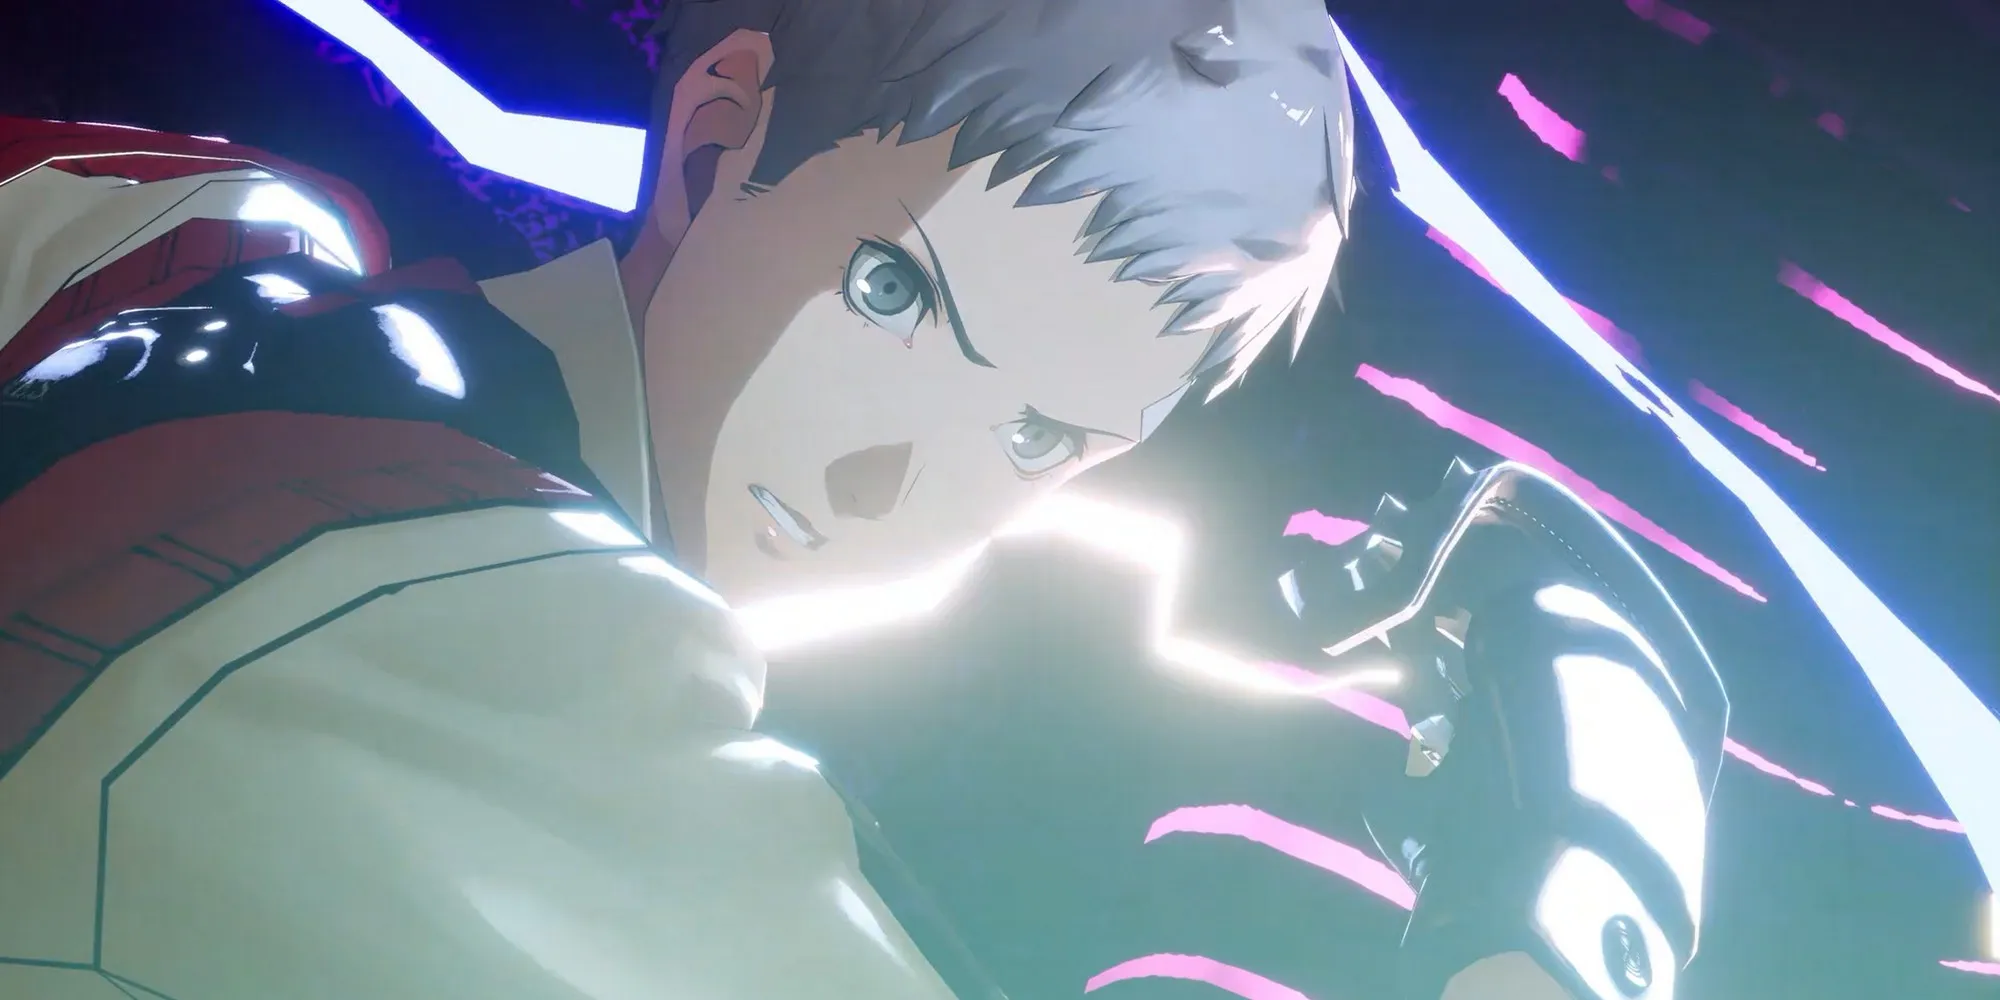 Akihiko close up during Theurgy